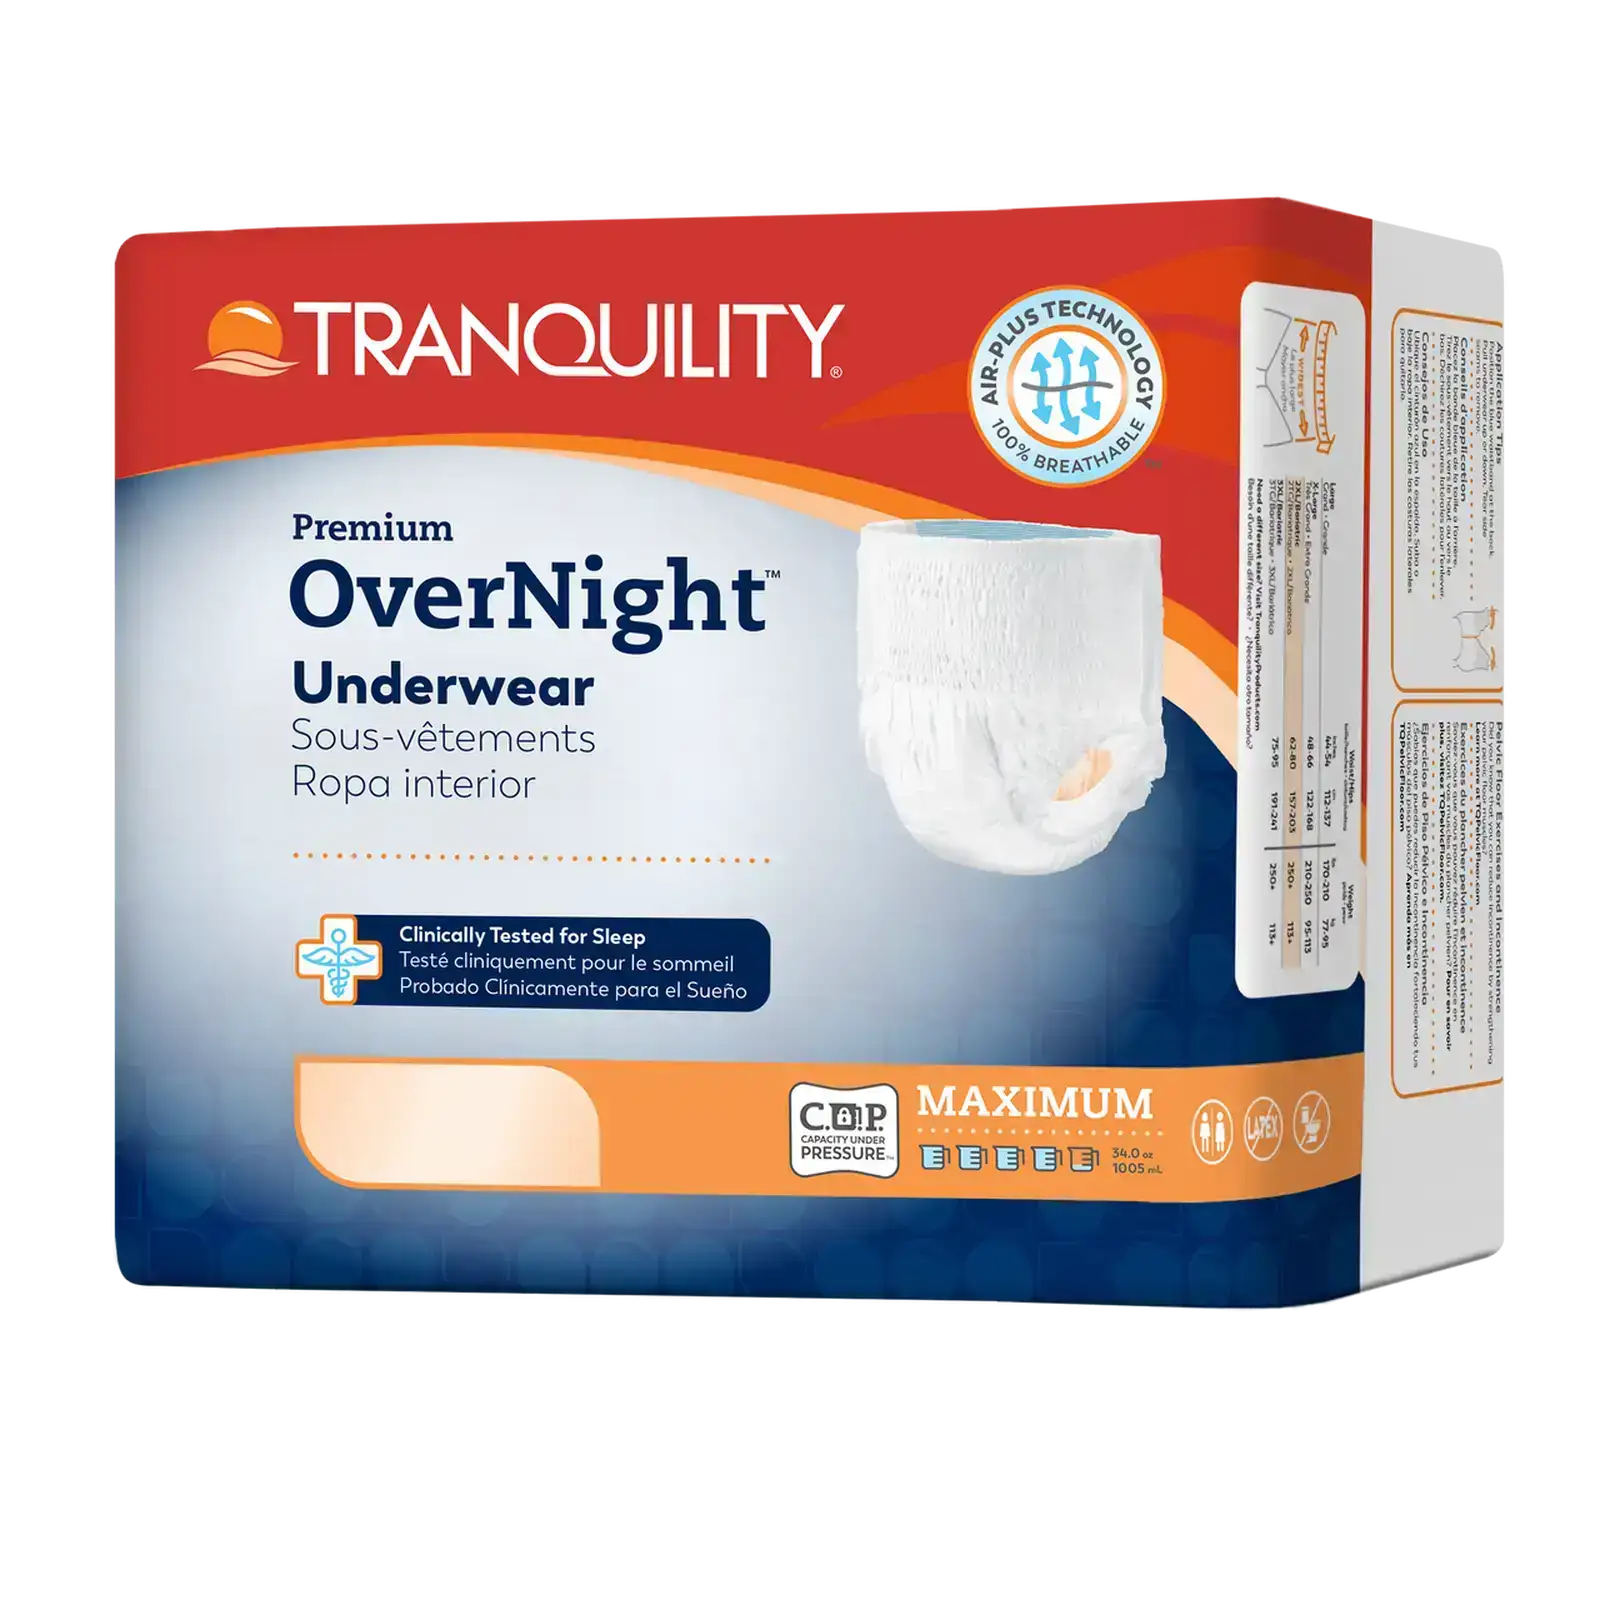 Image of Tranquility Premium Overnight Disposable Absorbent Underwear